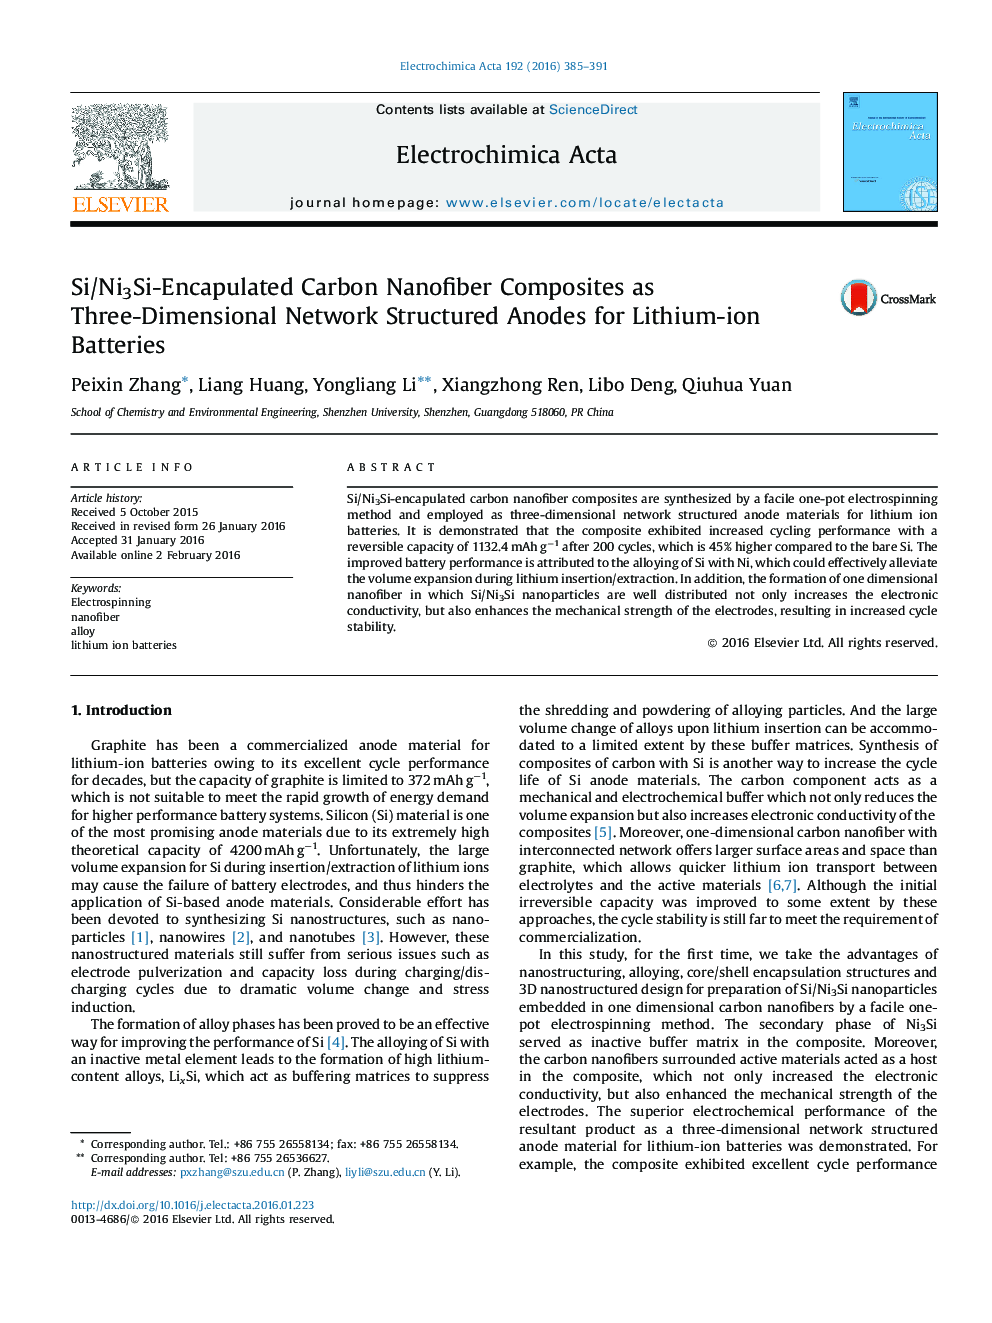 Si/Ni3Si-Encapulated Carbon Nanofiber Composites as Three-Dimensional Network Structured Anodes for Lithium-ion Batteries